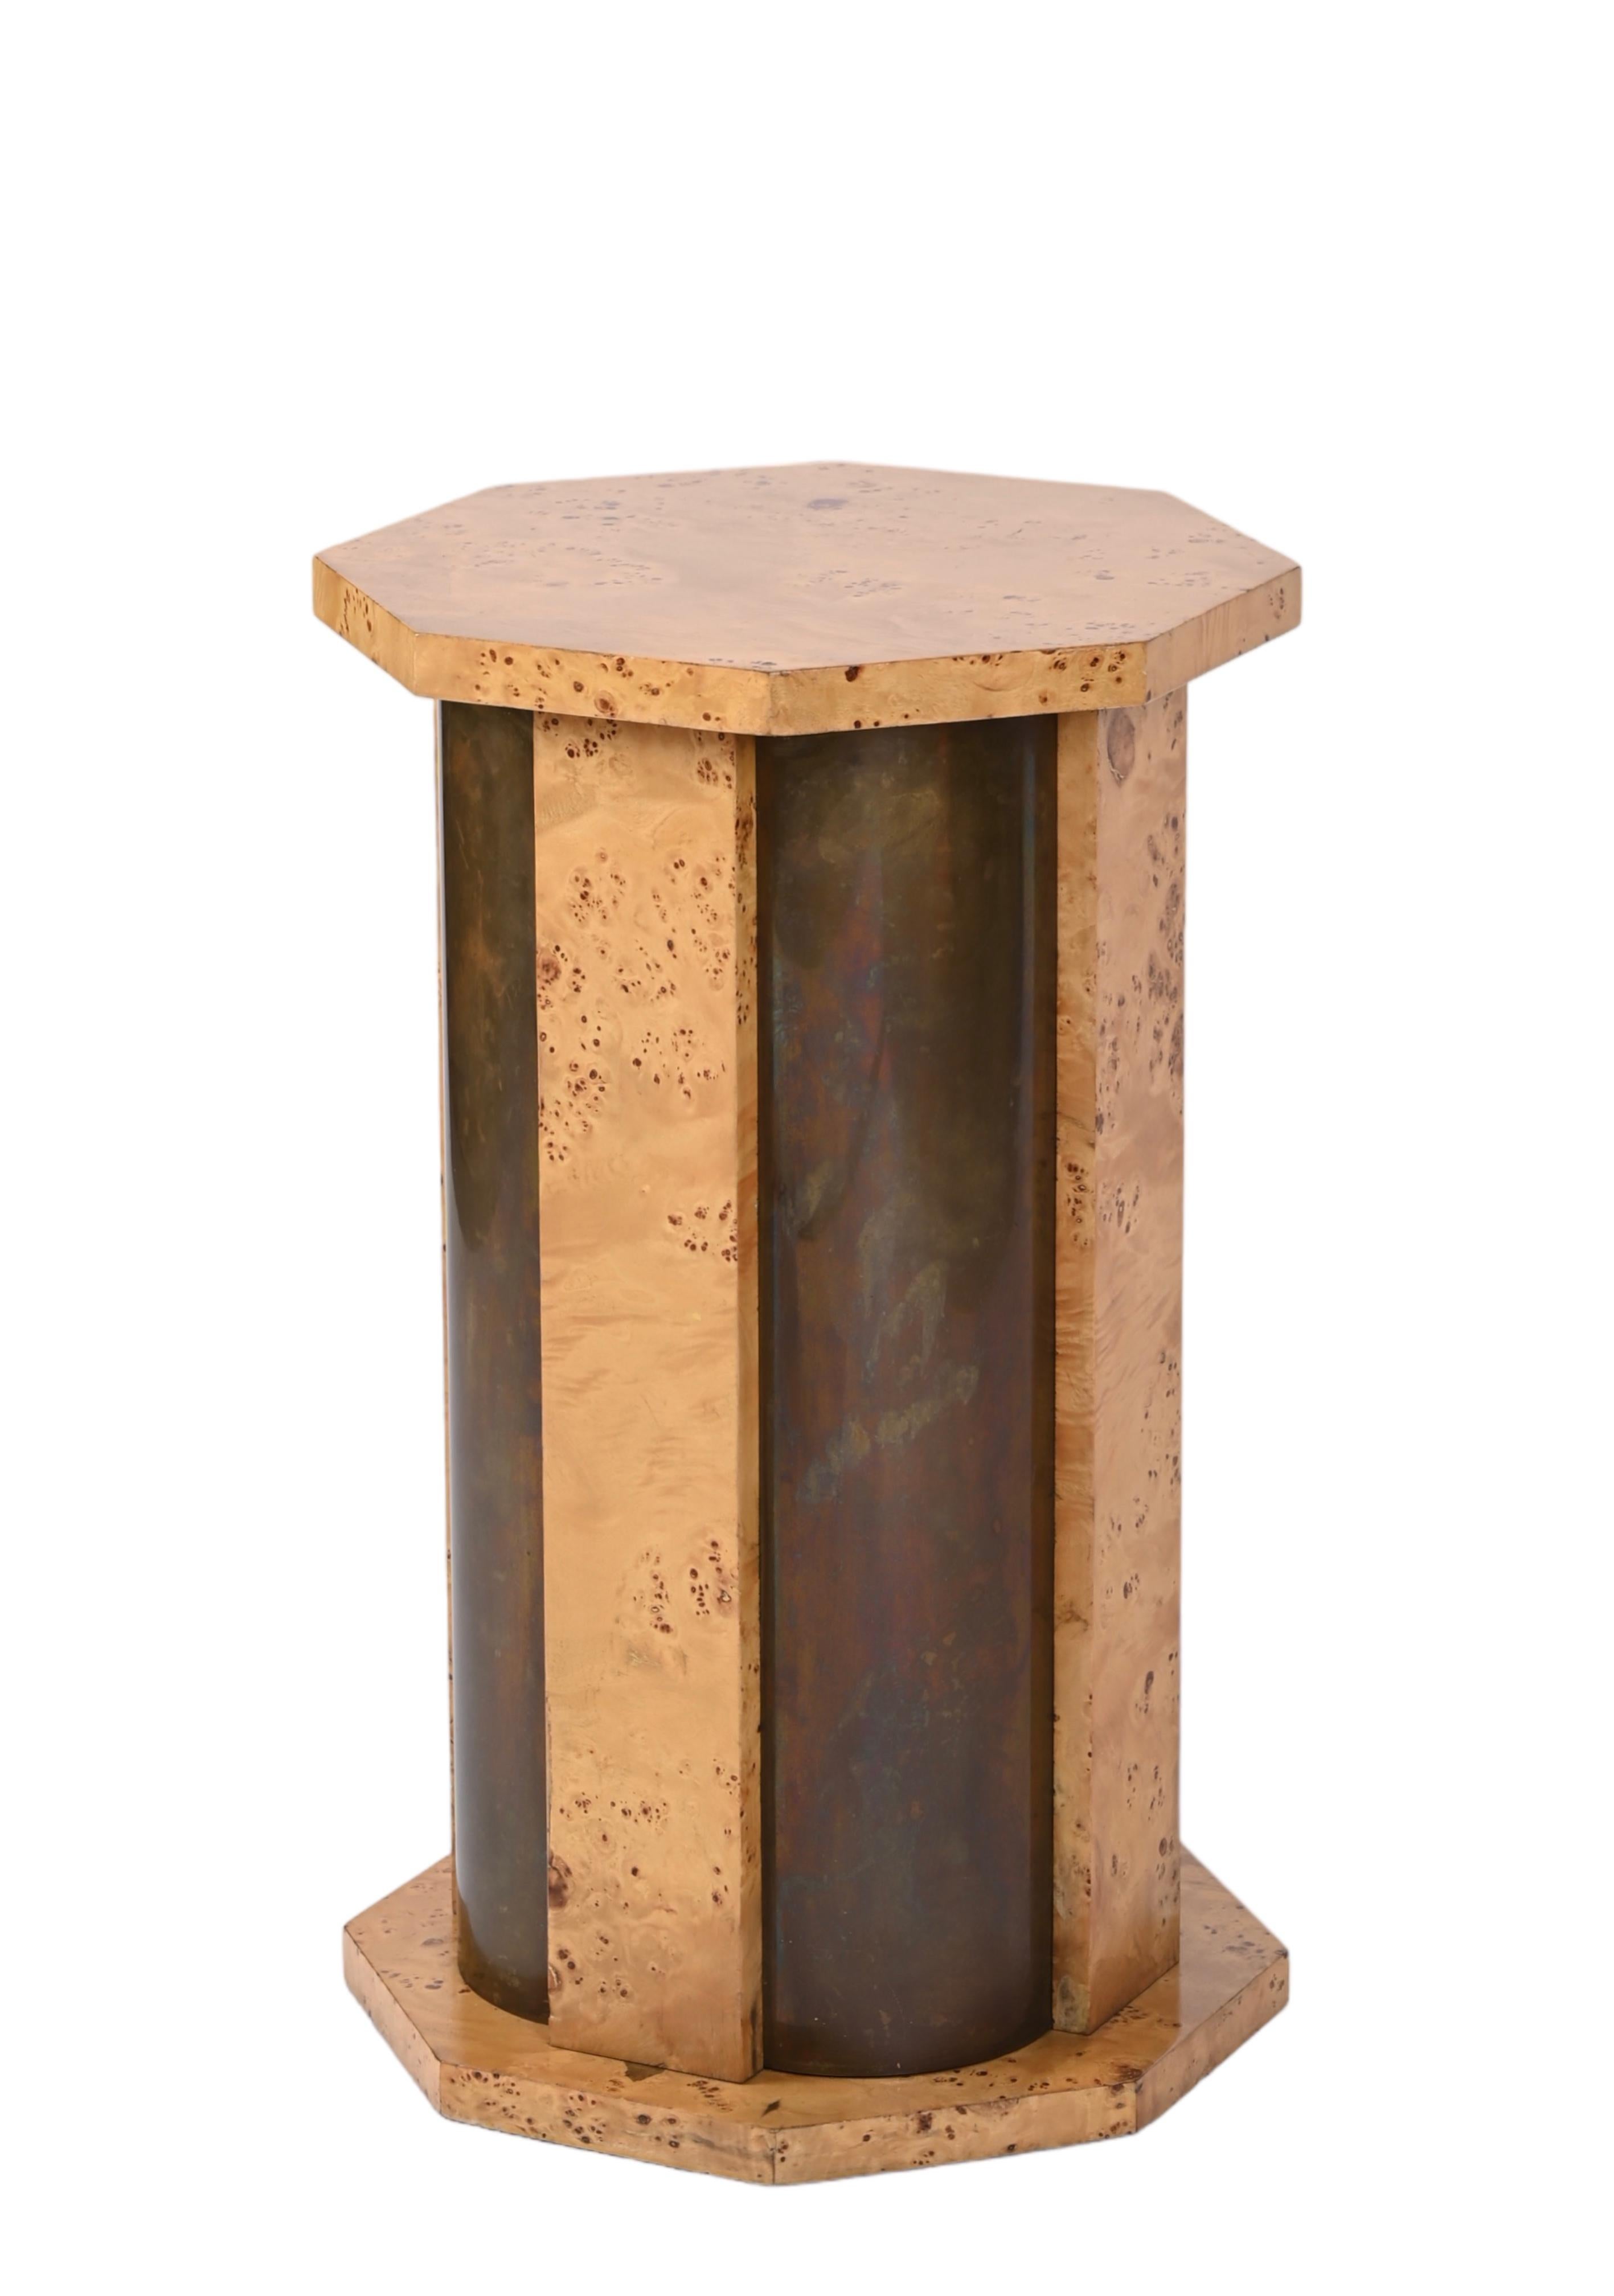 Tommaso Barbi Octagonal Table Pedestal in Burl Wood and Brass, Italy, 1970 For Sale 3